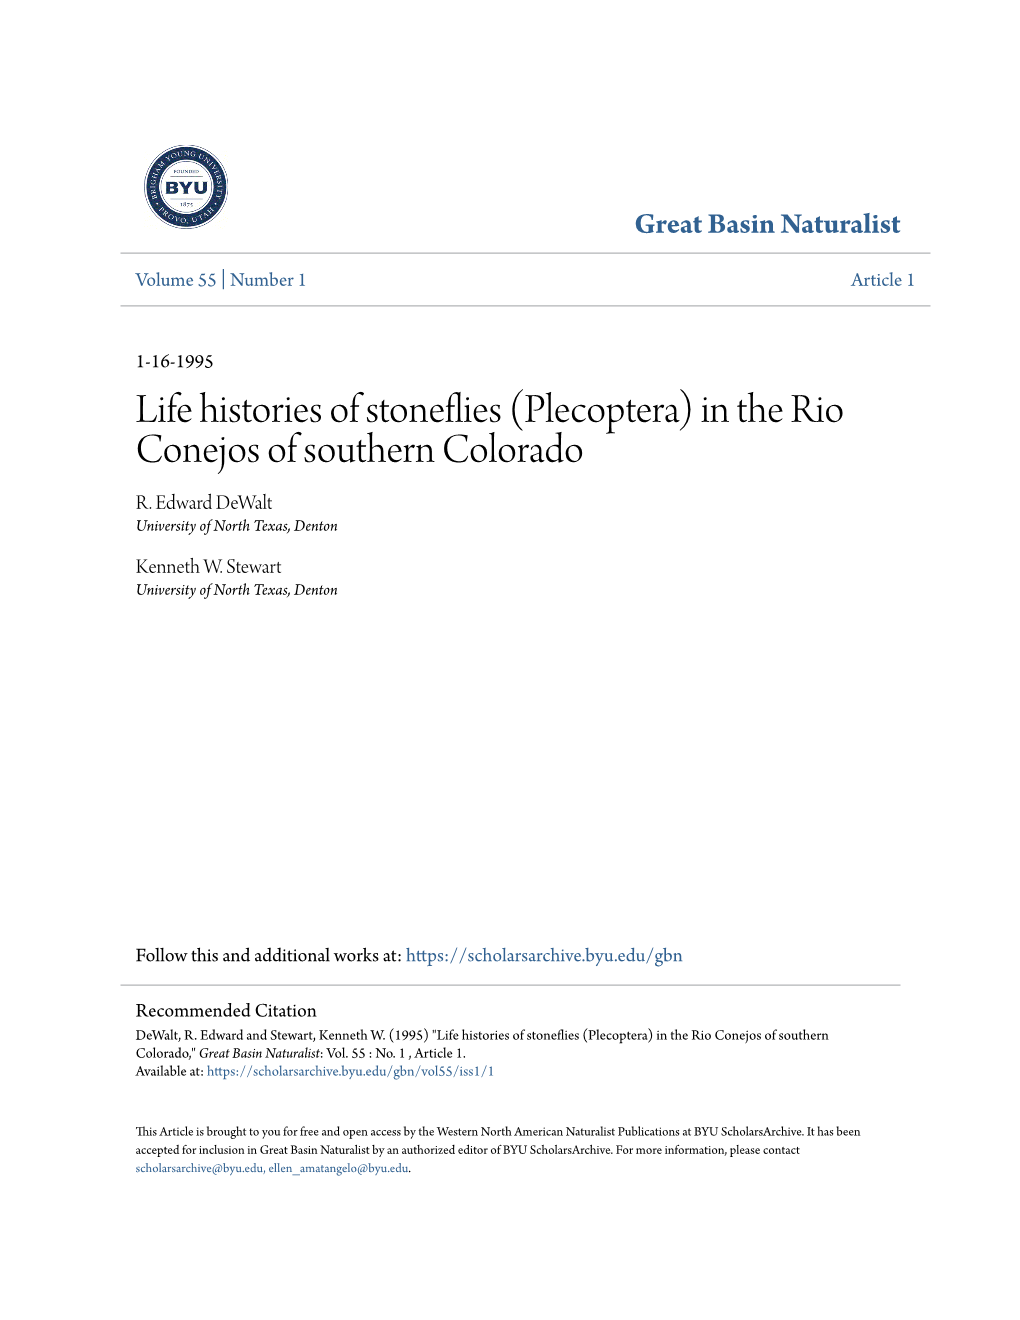 Life Histories of Stoneflies (Plecoptera) in the Rio Conejos of Southern Colorado," Great Basin Naturalist: Vol